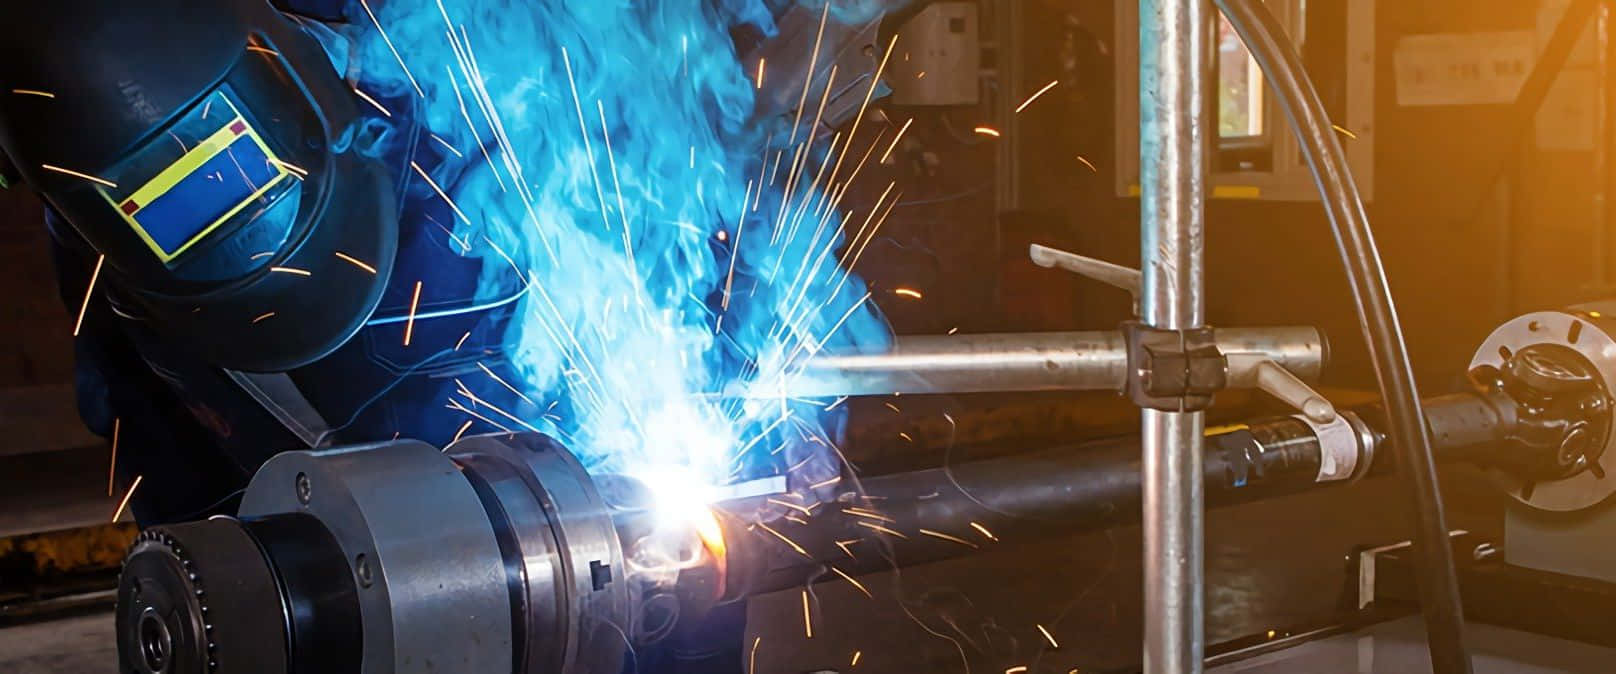 A Worker Is Welding A Metal Pipe With Blue Flames Wallpaper